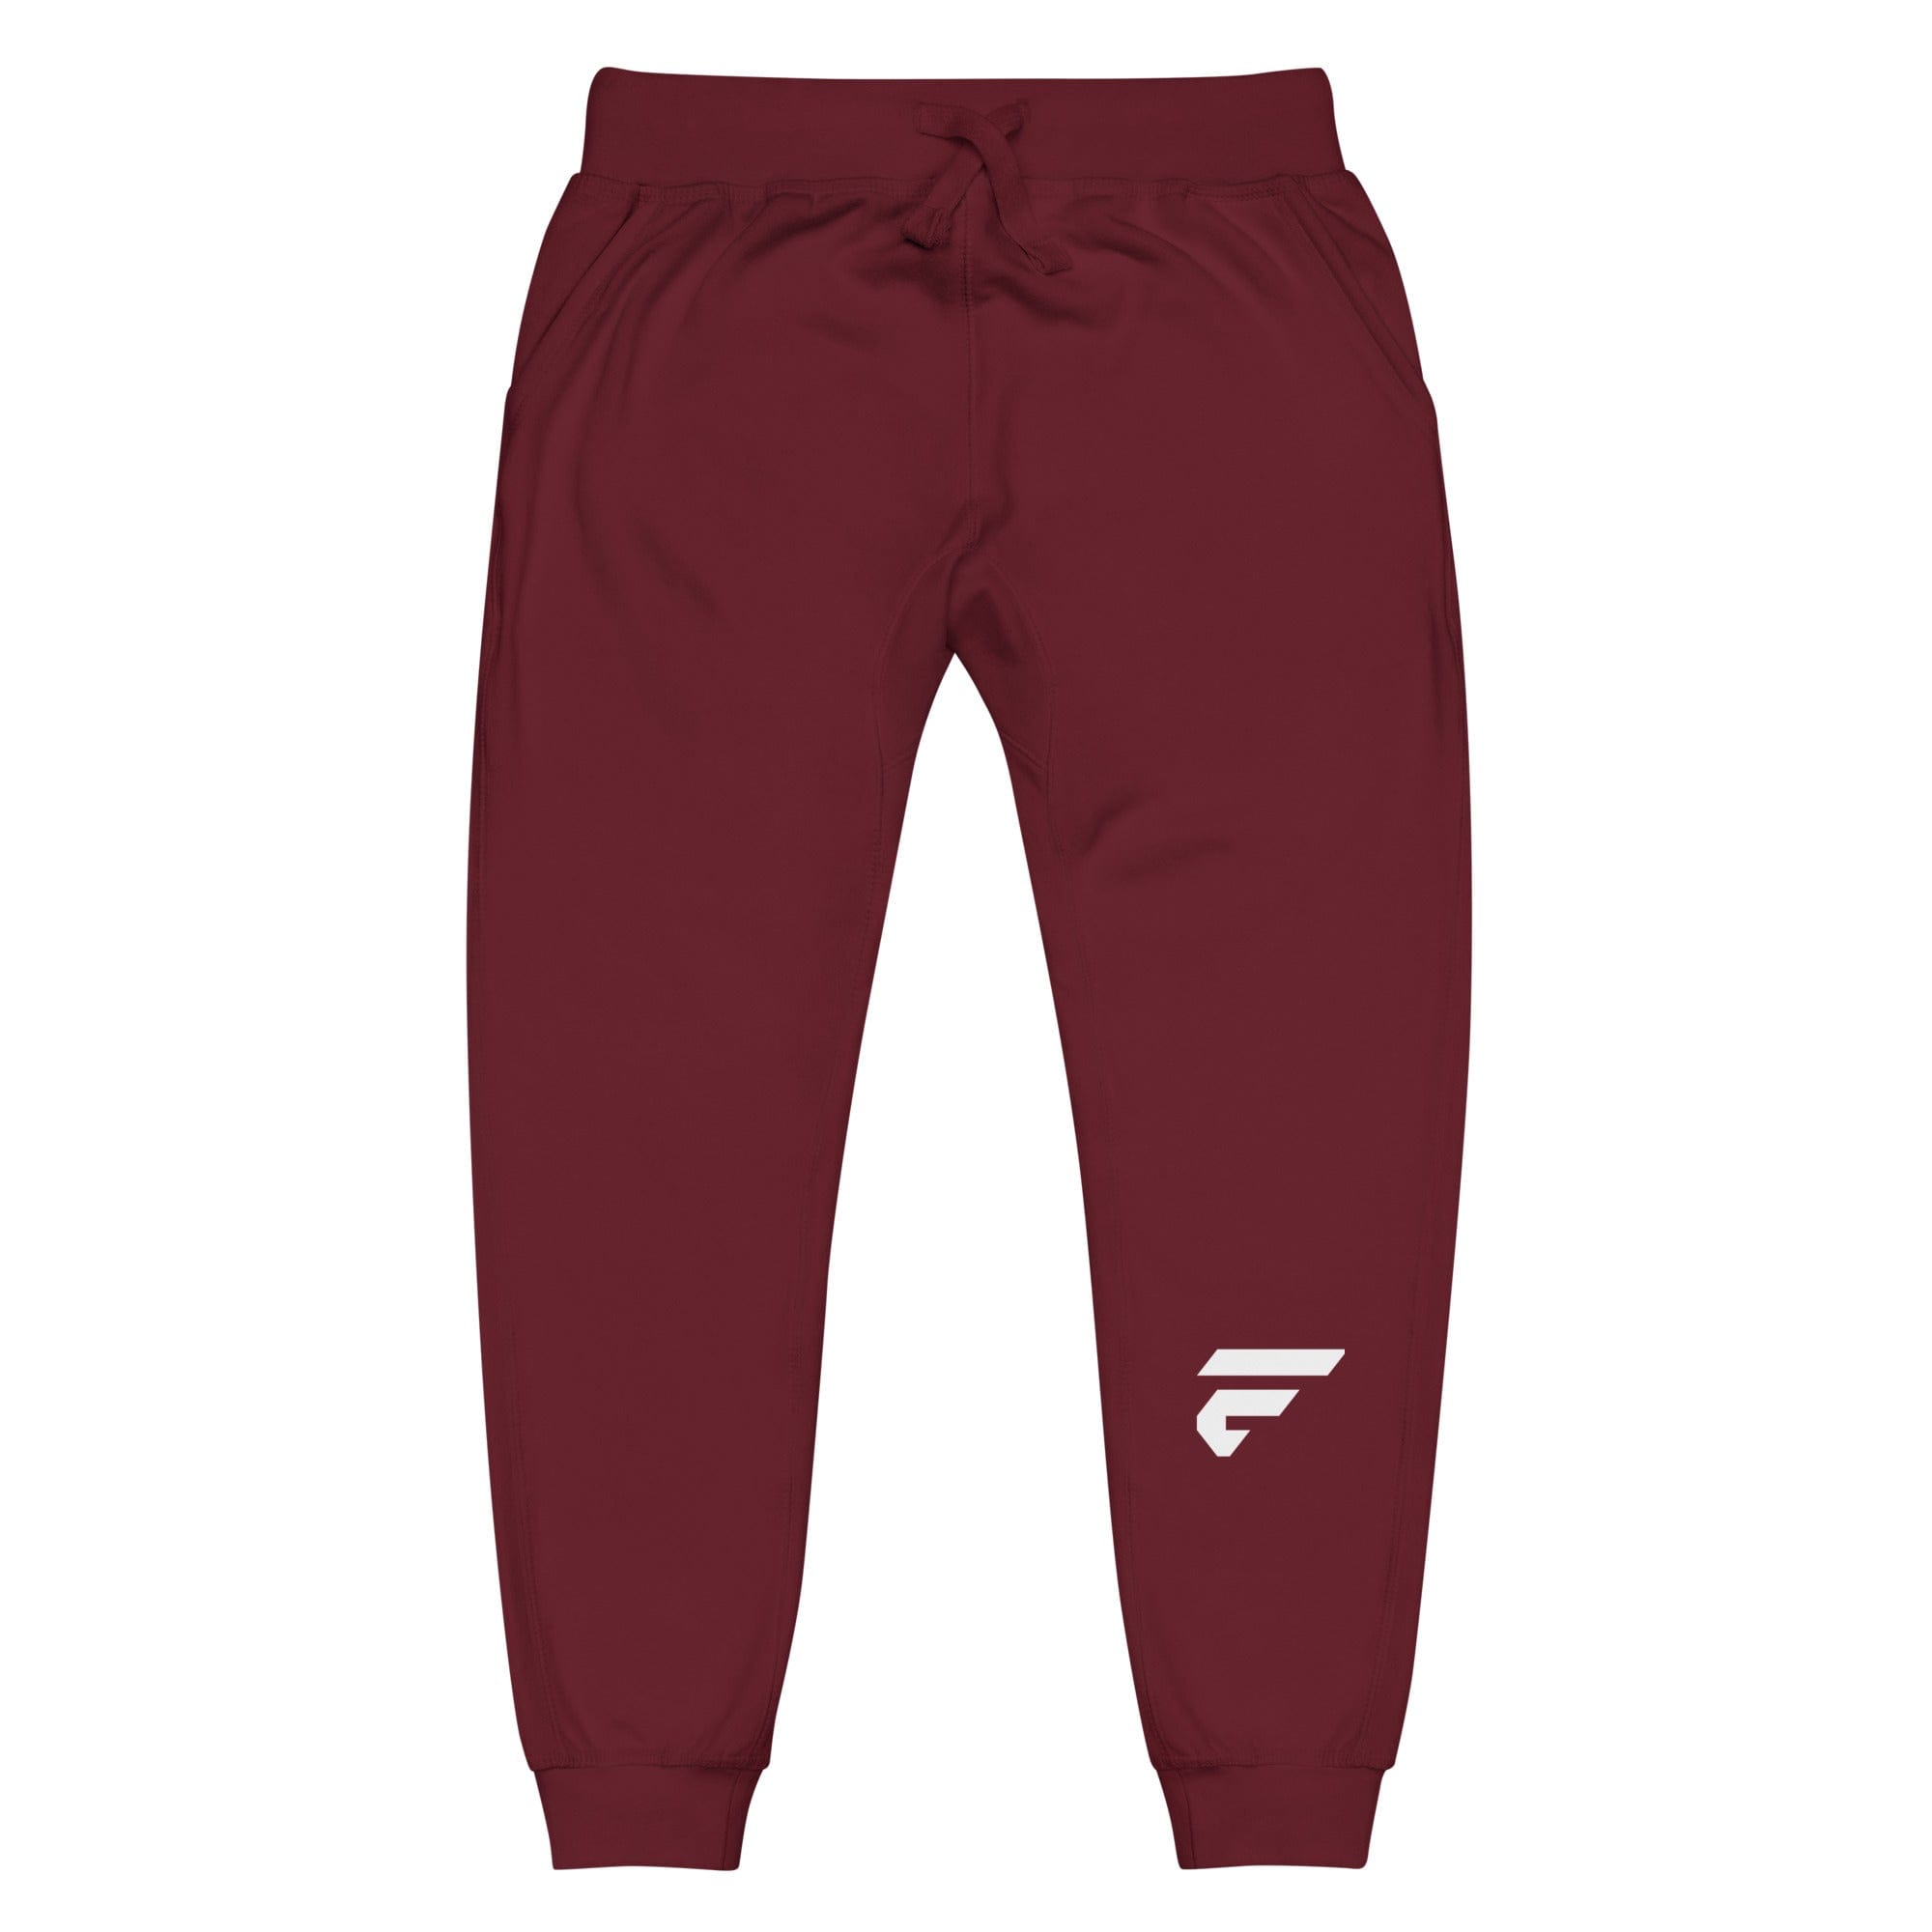 Maroon unisex joggers with Fire Cornhole F logo in white